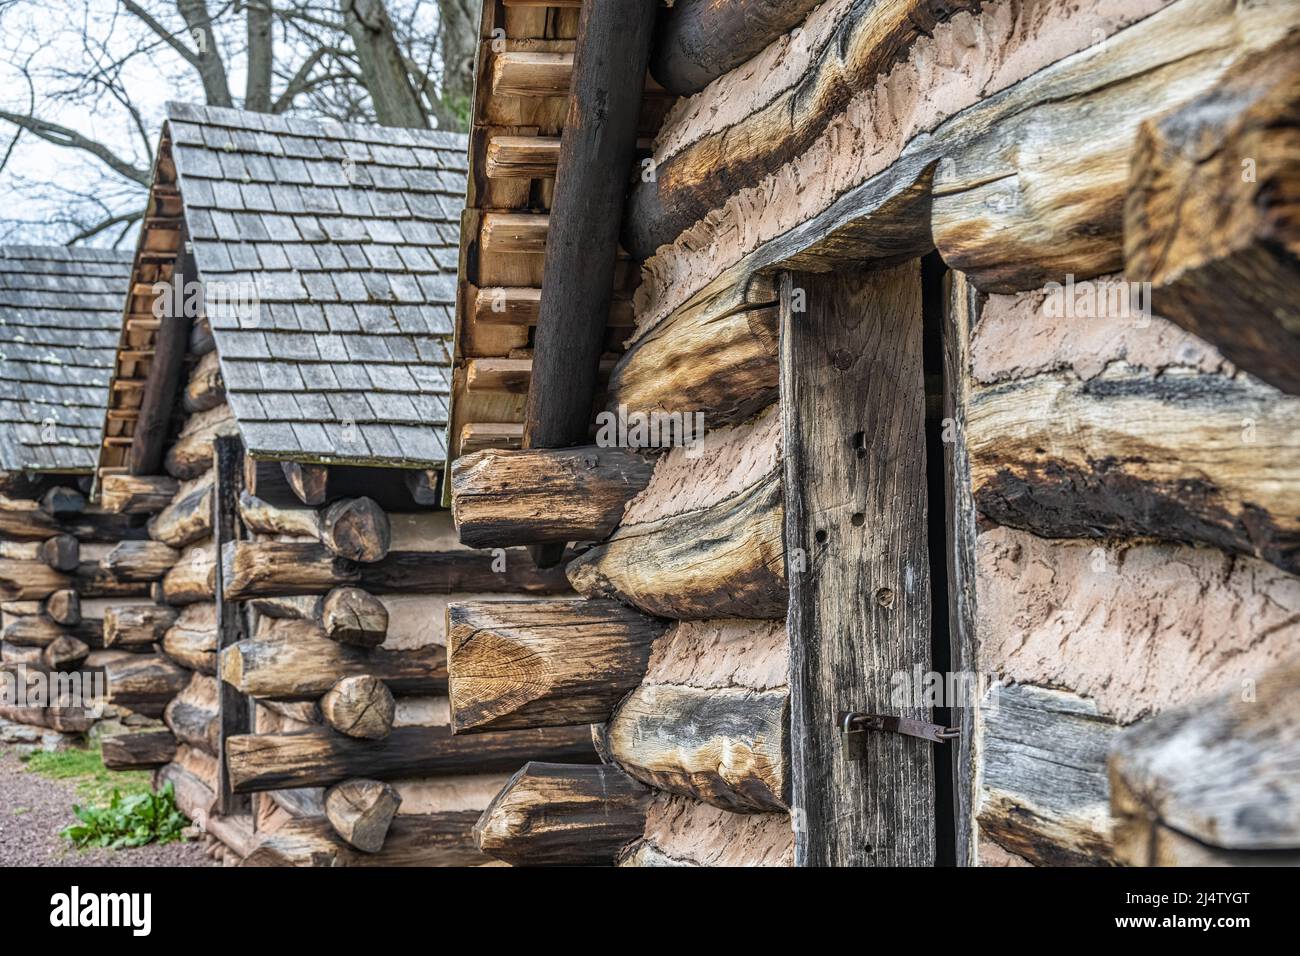 Washington's Guard cabins near General George Washington's headquarters at the Continental Army's encampment at Valley Forge in Pennsylvania. (USA) Stock Photo